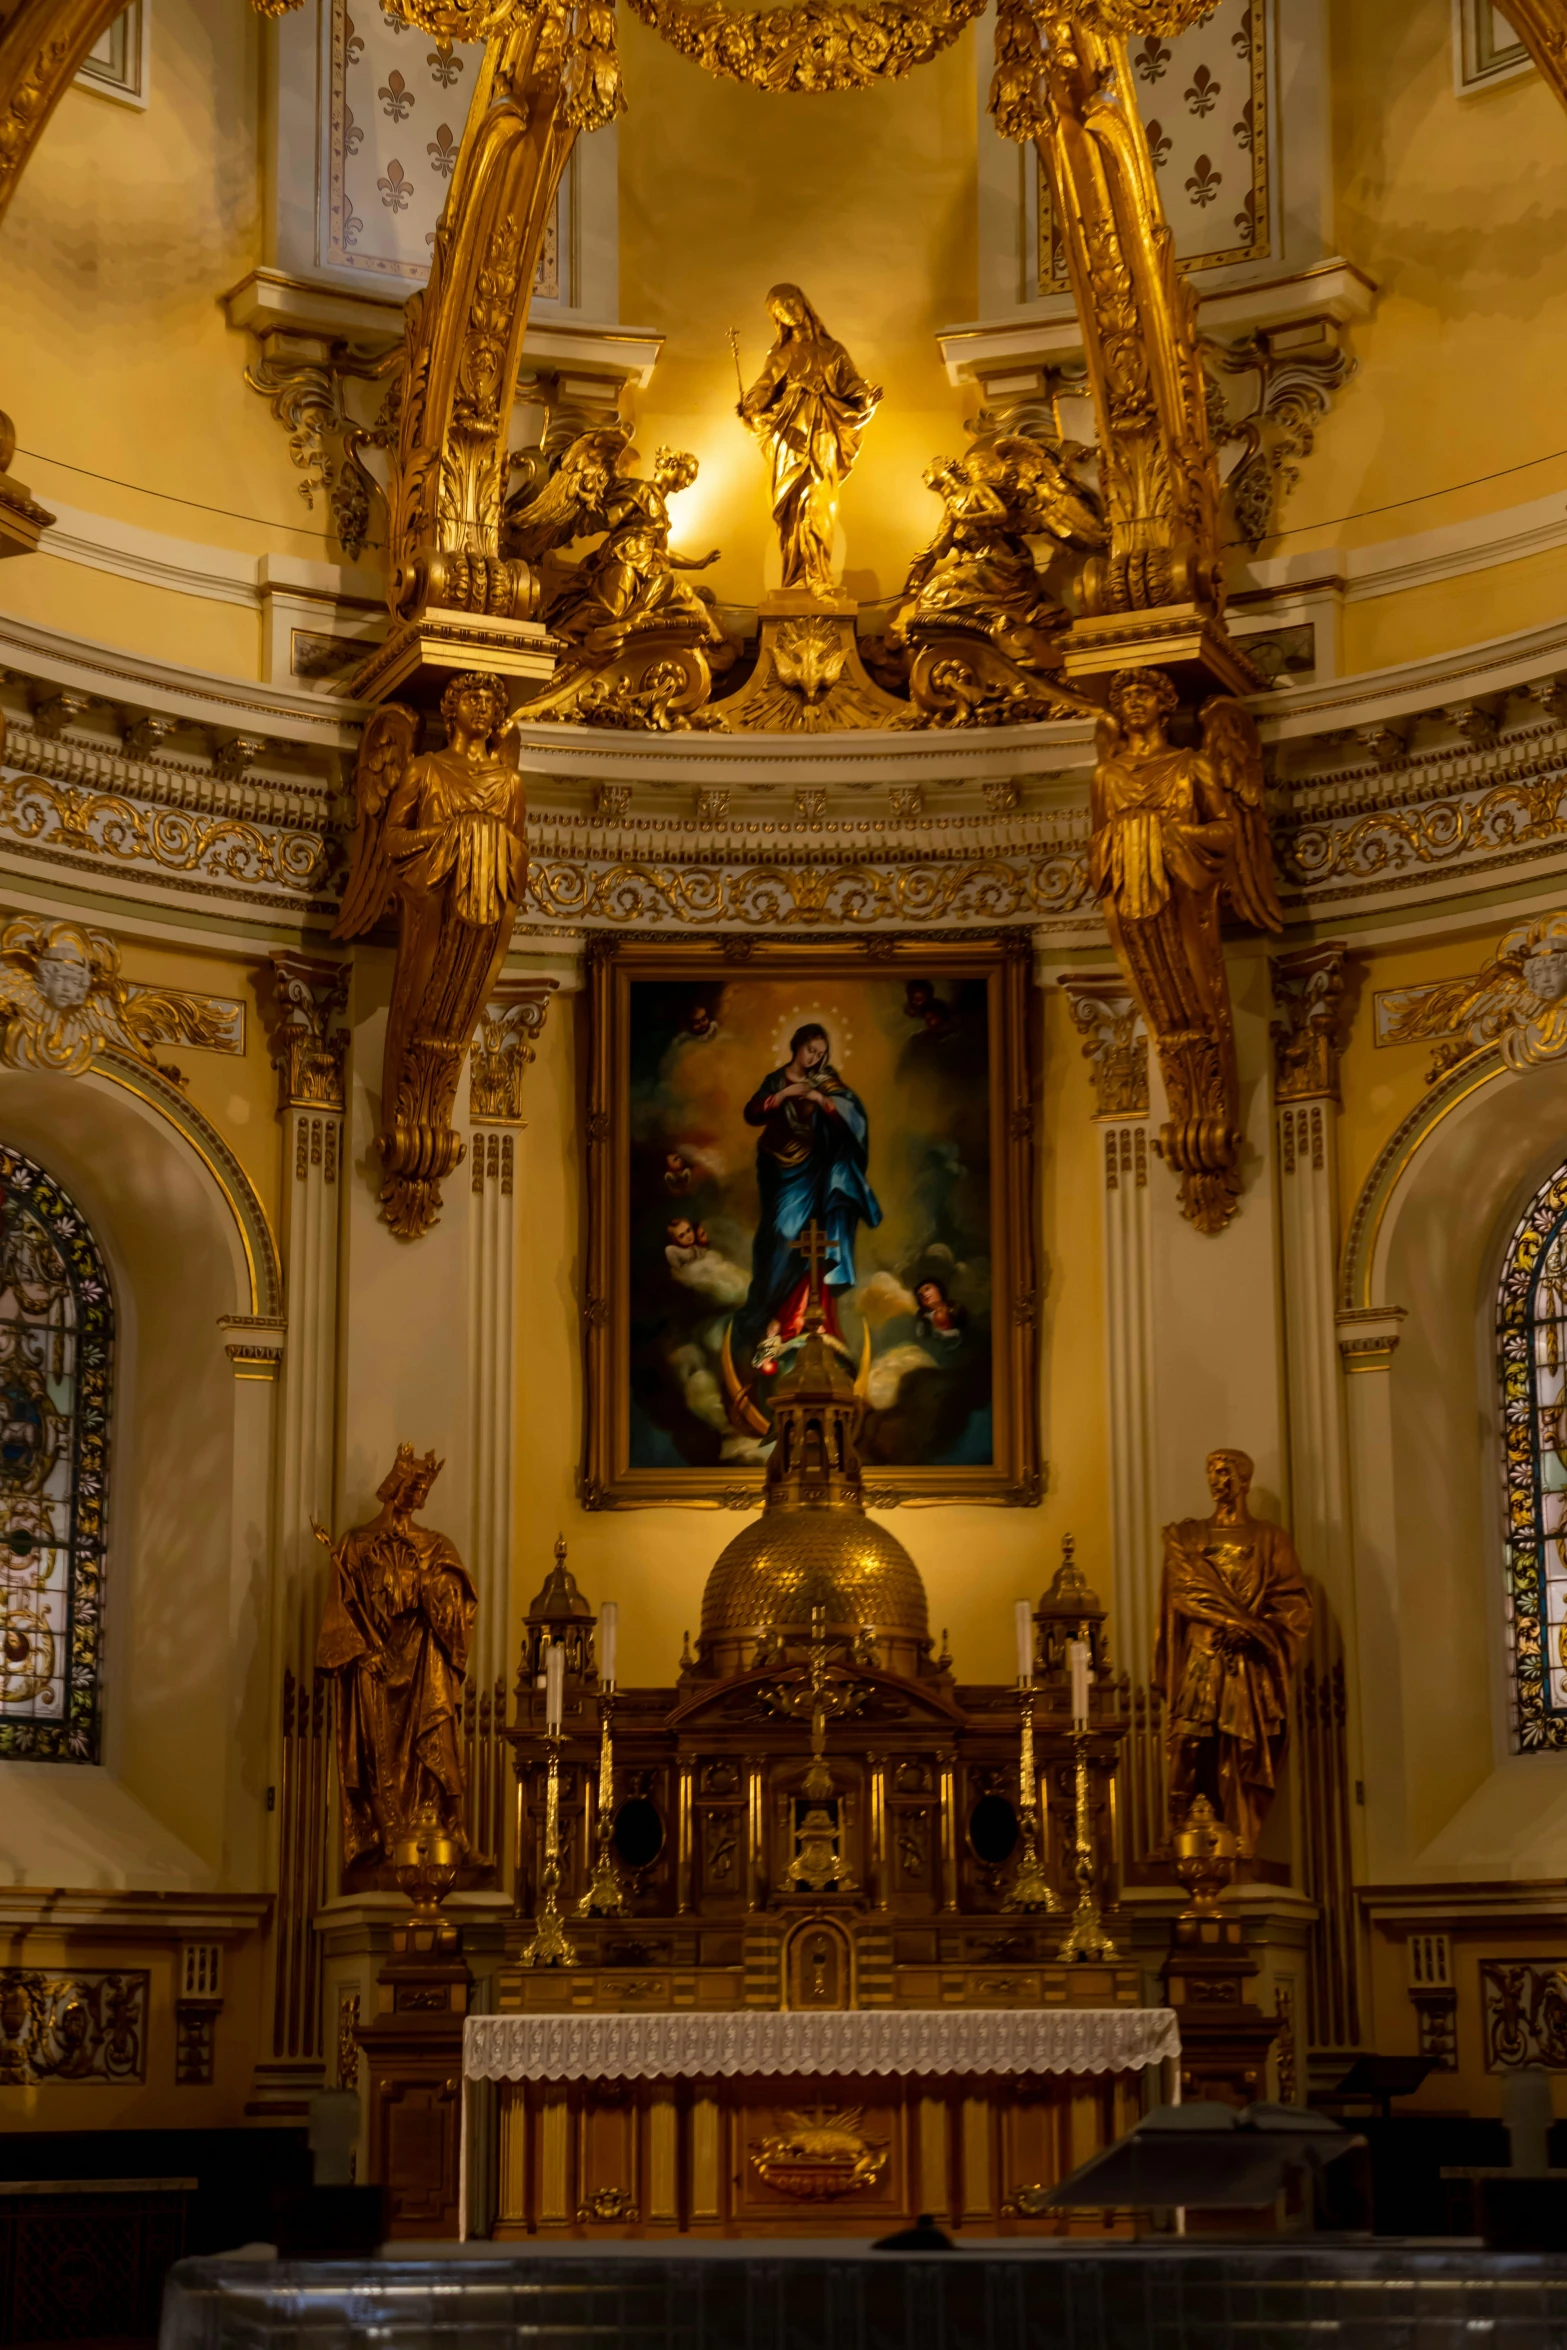 this church contains a painting and statues